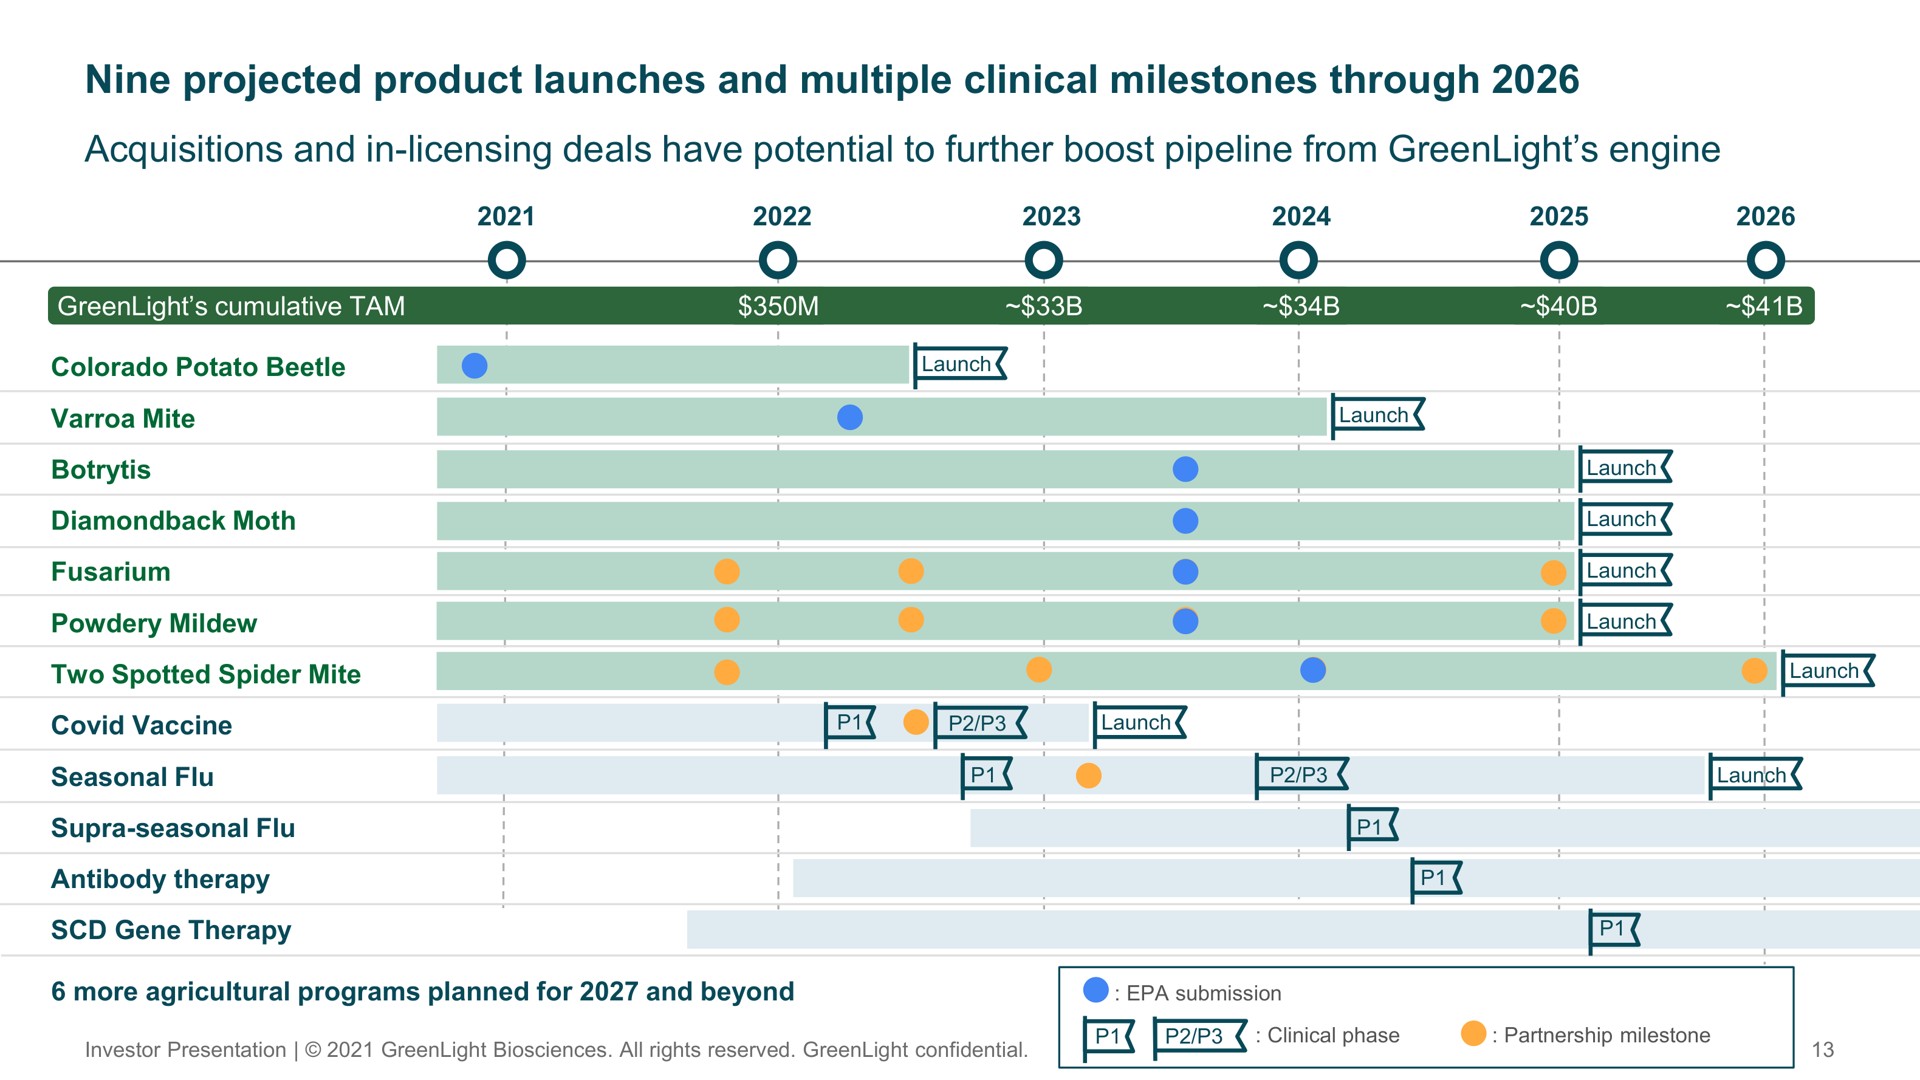 nine projected product launches and multiple clinical milestones through acquisitions and in licensing deals have potential to further boost pipeline from engine | GreenLight